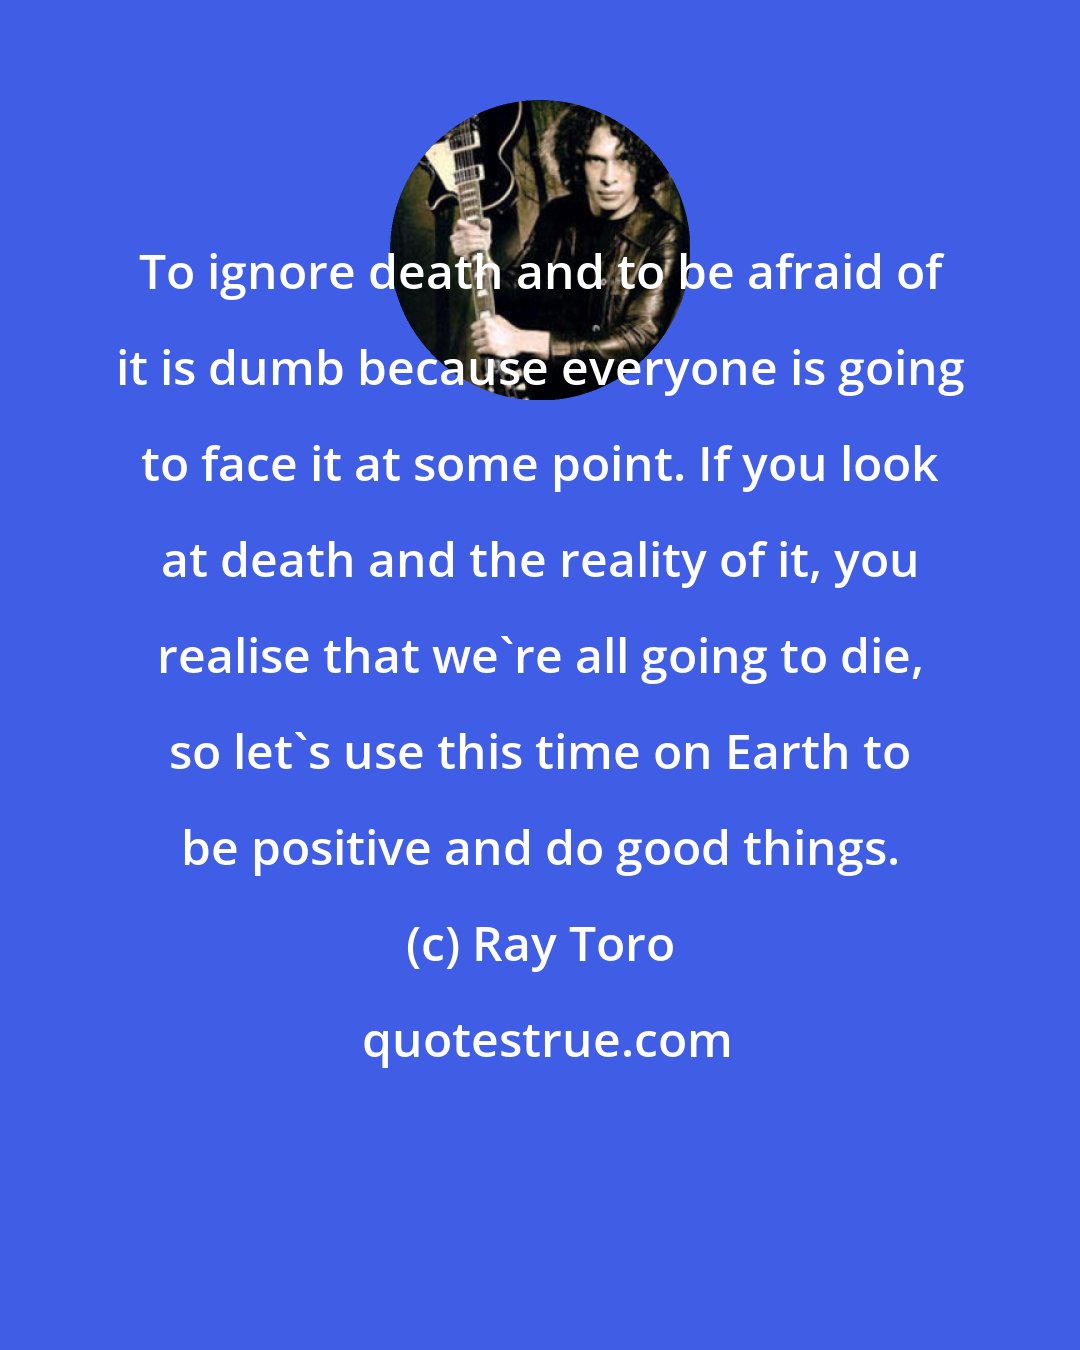 Ray Toro: To ignore death and to be afraid of it is dumb because everyone is going to face it at some point. If you look at death and the reality of it, you realise that we're all going to die, so let's use this time on Earth to be positive and do good things.